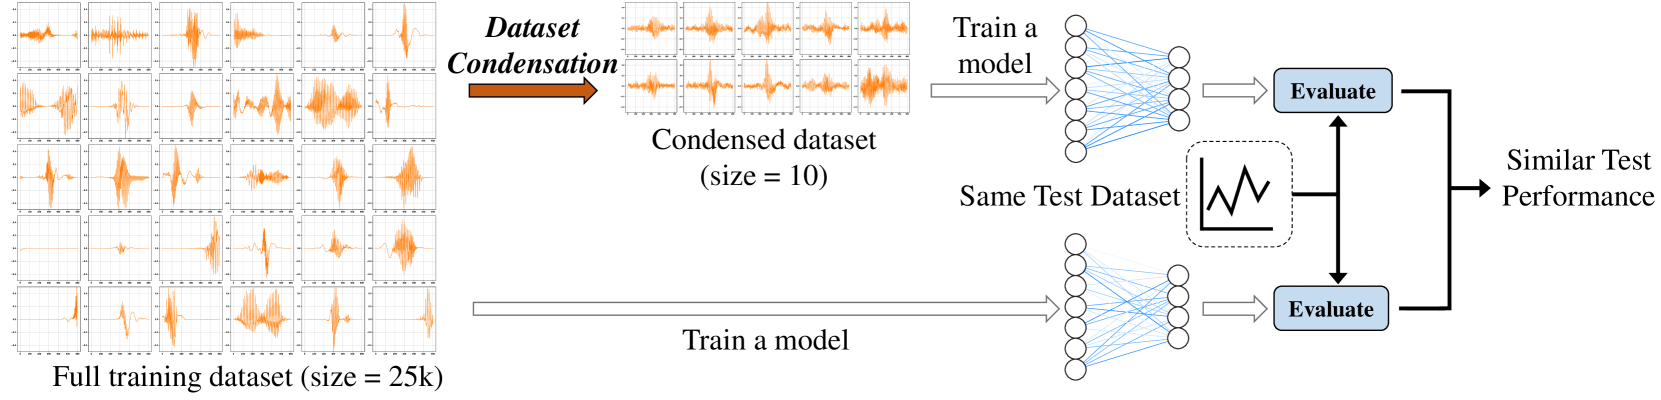 Dataset Condensation for Time Series Classification via Dual Domain Matching